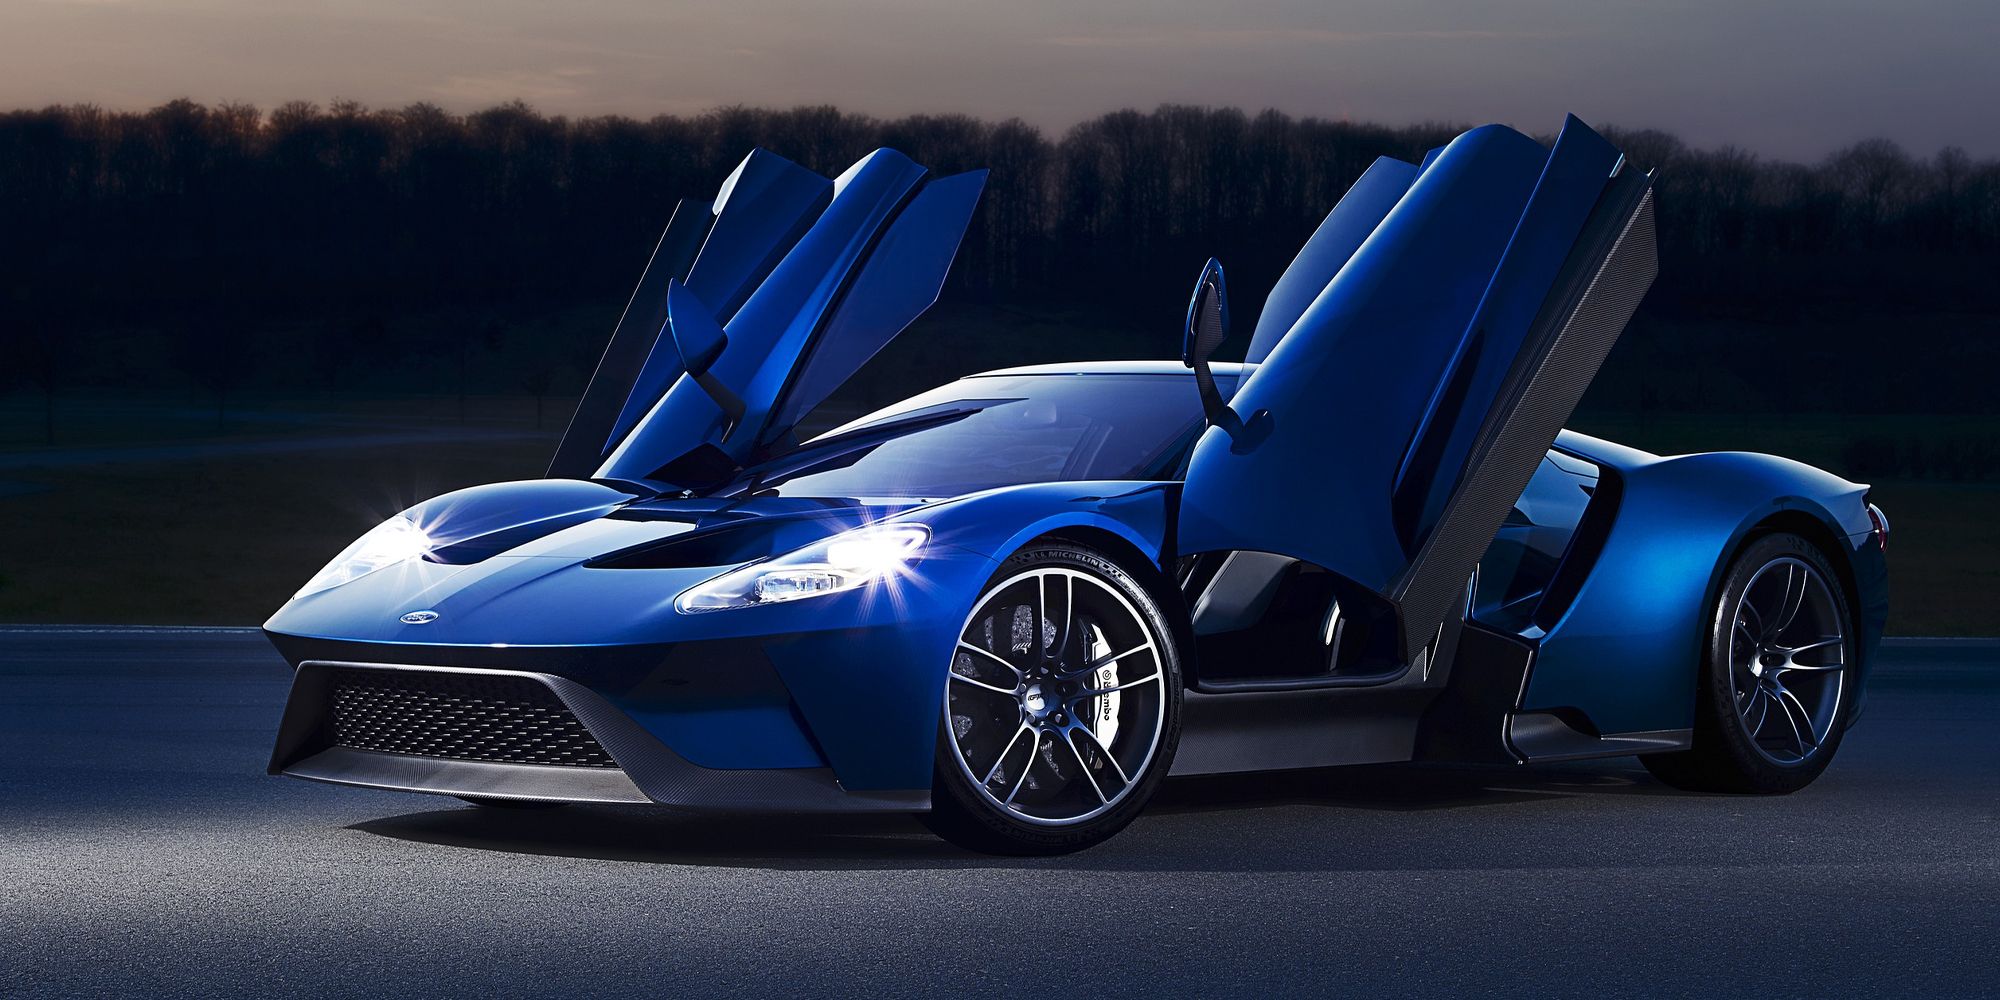 The new Ford GT with its doors up